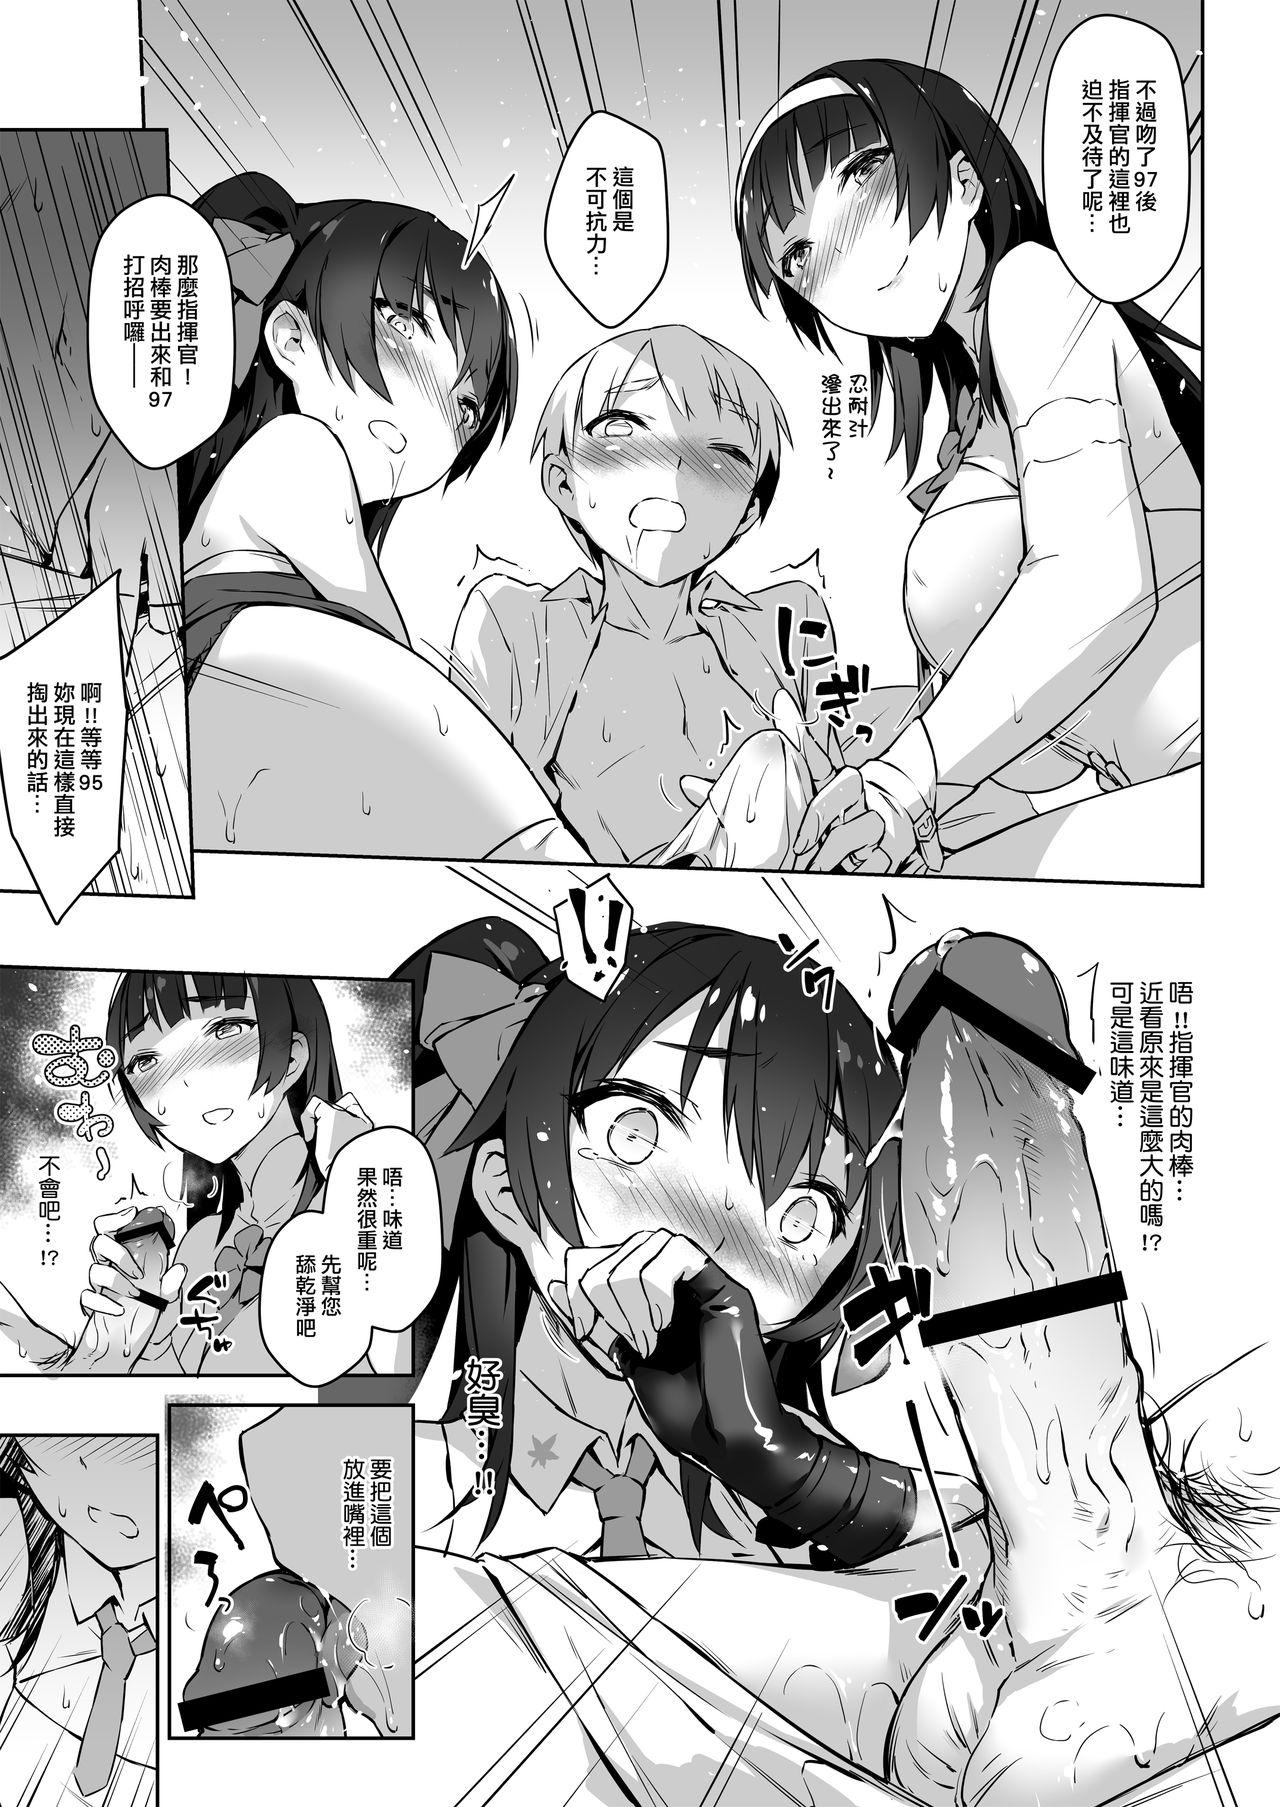 Spreading Type 95 Type 97, Let Sister Teaches You!! - Girls frontline Staxxx - Page 11